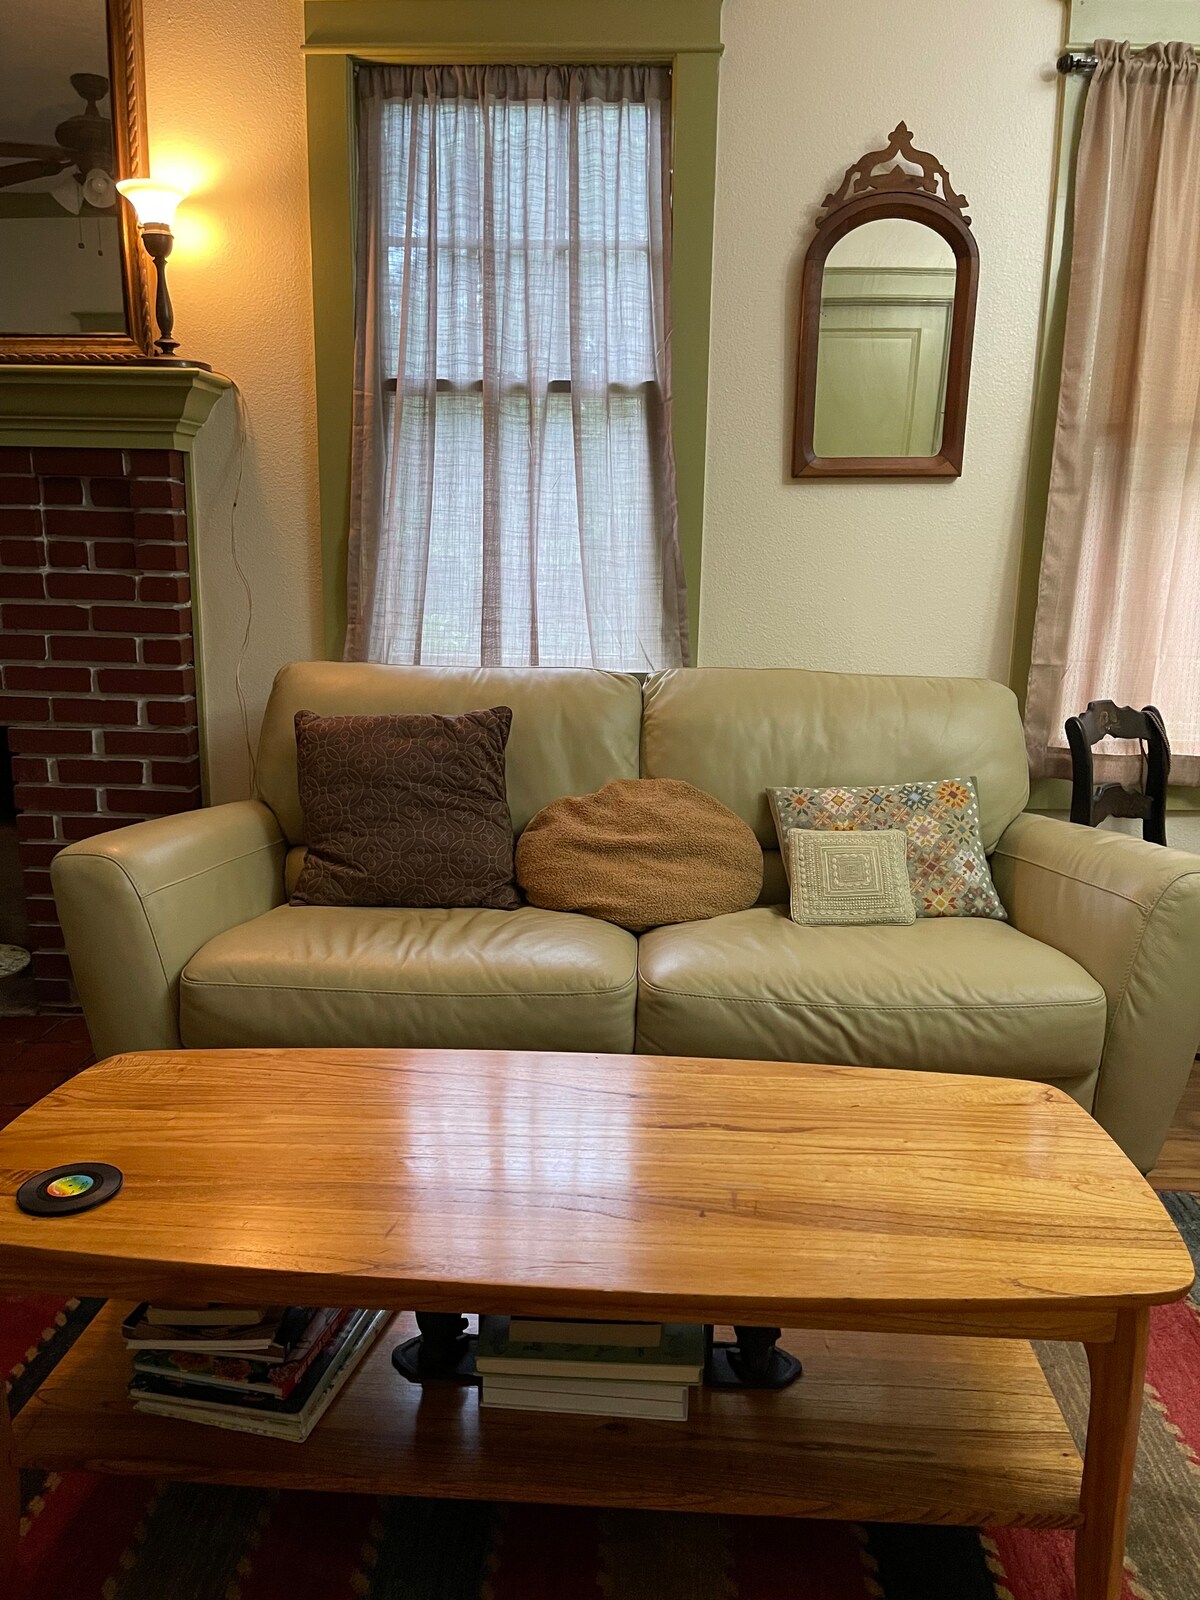 Historic, Cozy and Quiet Bunglalow in Sanford, FL